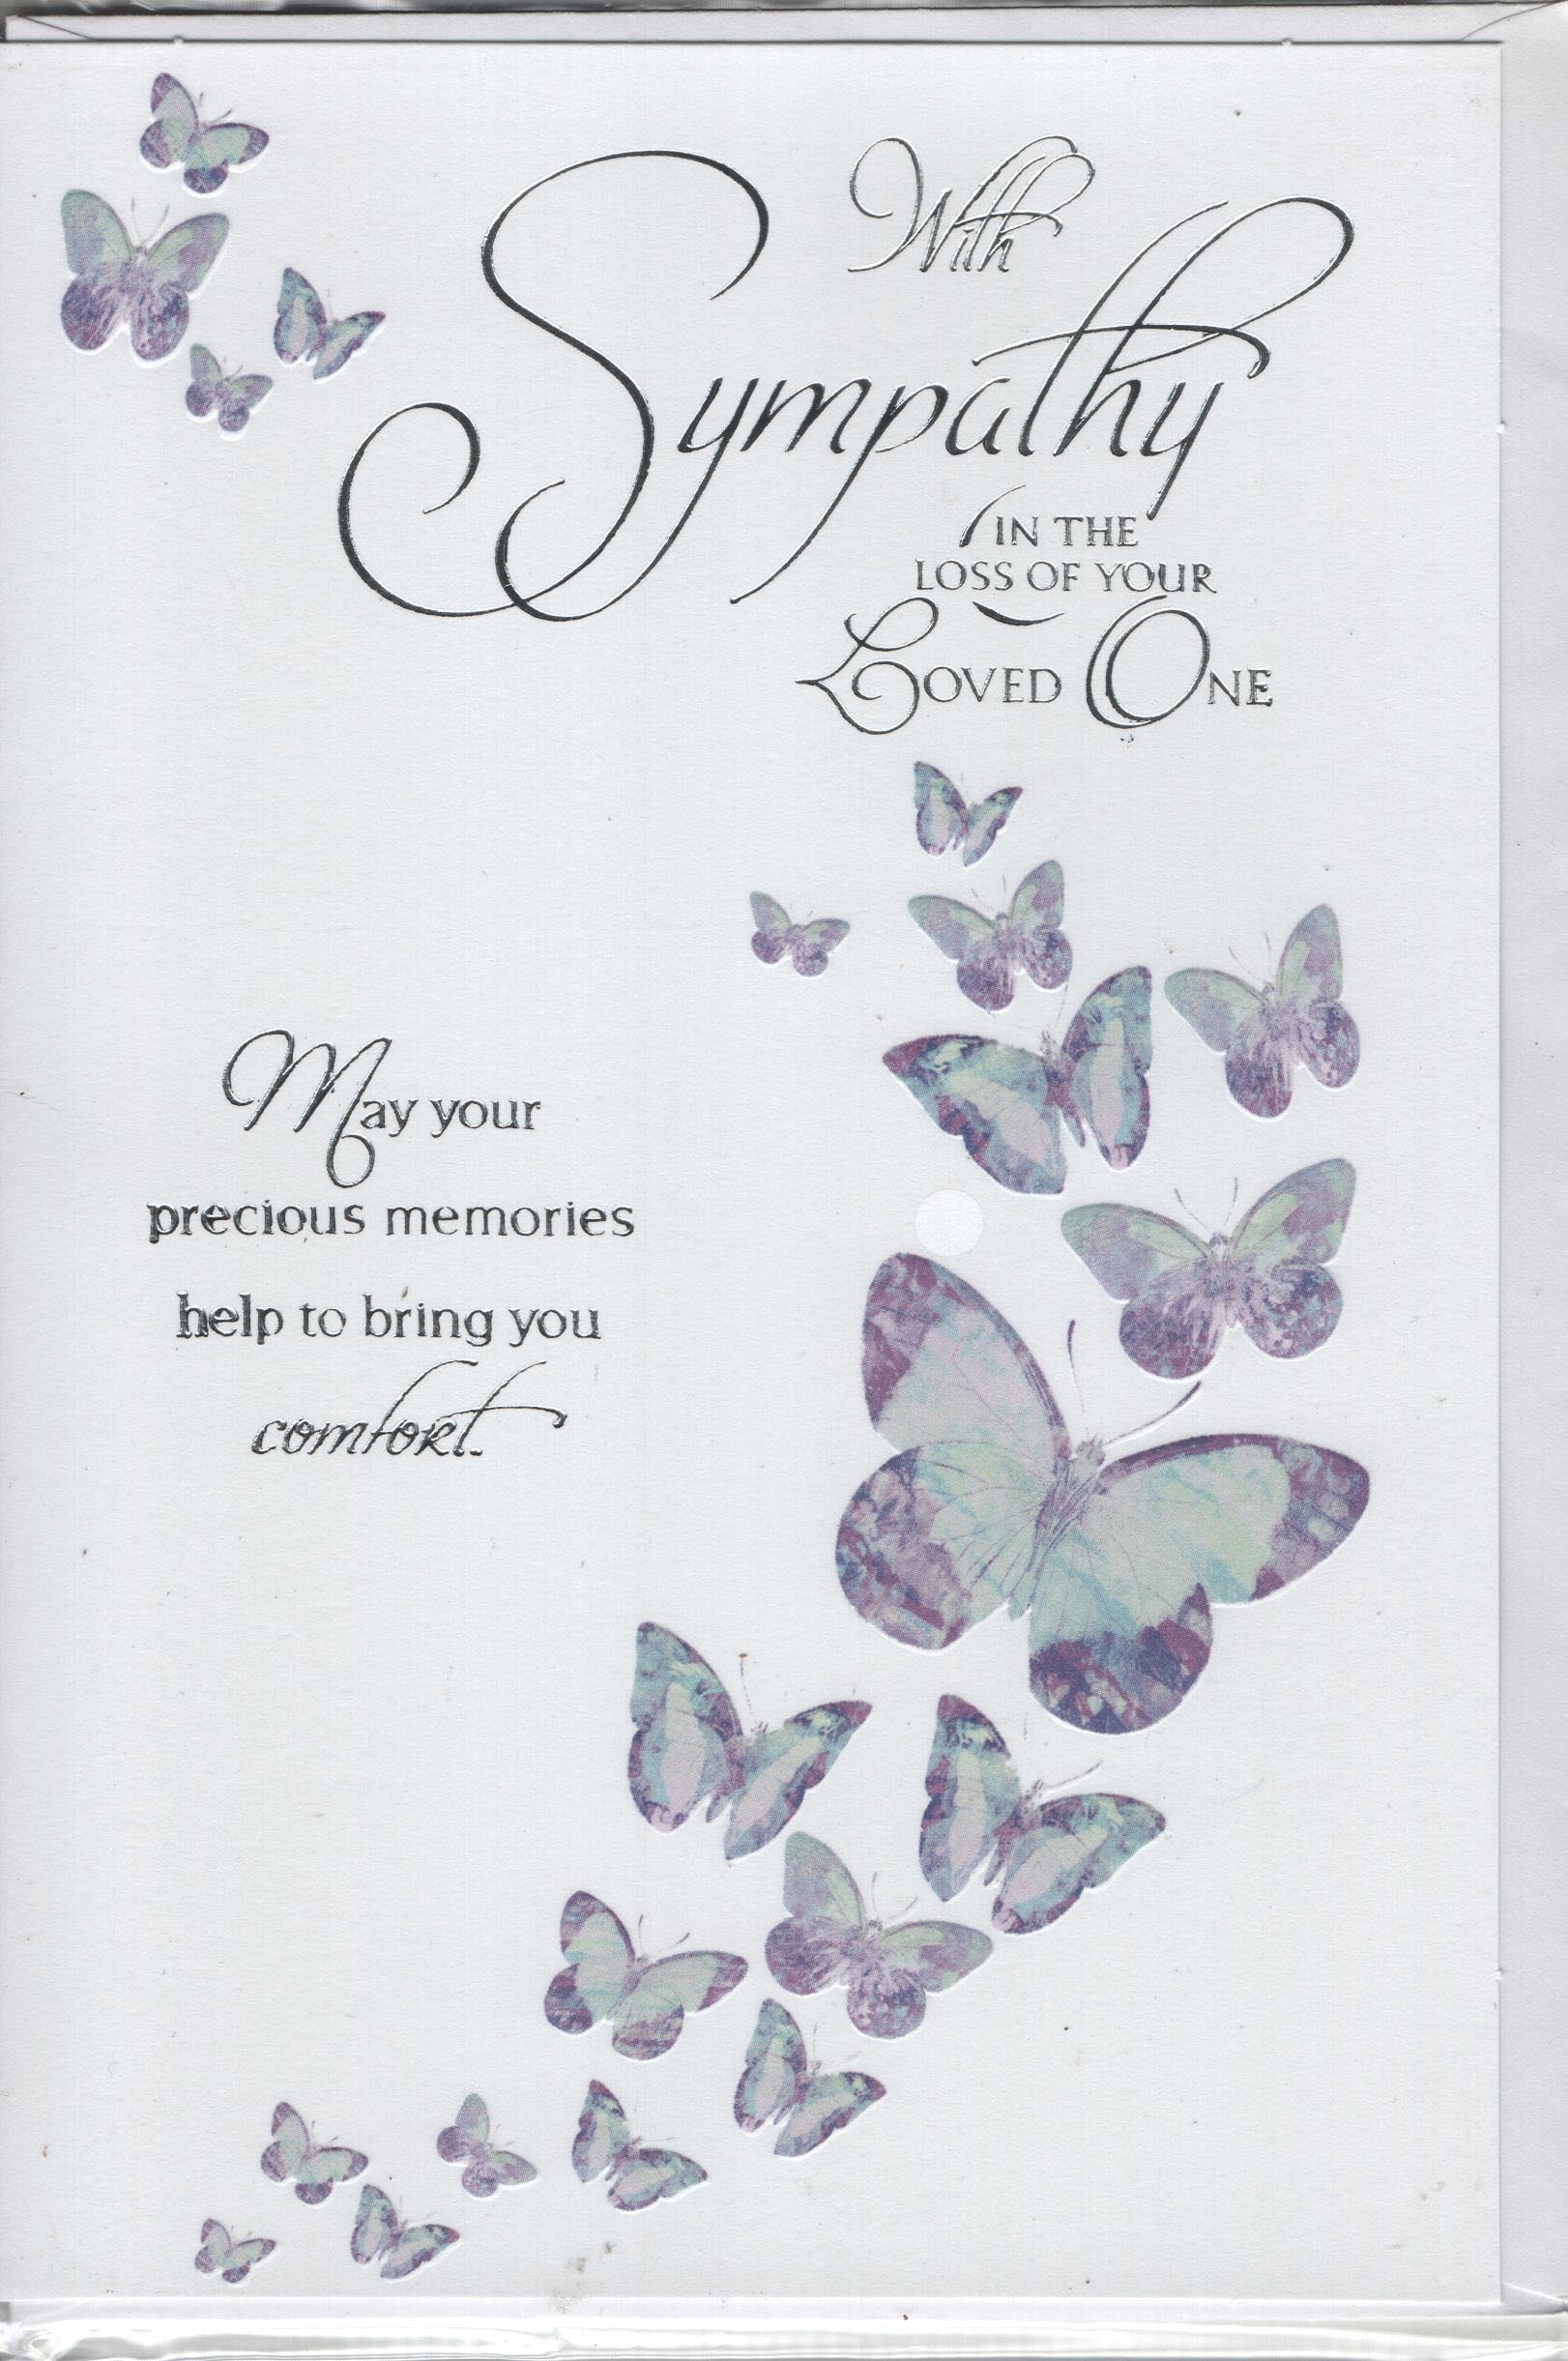 With Sympathy in The Loss of Your Loved One Greeting Card